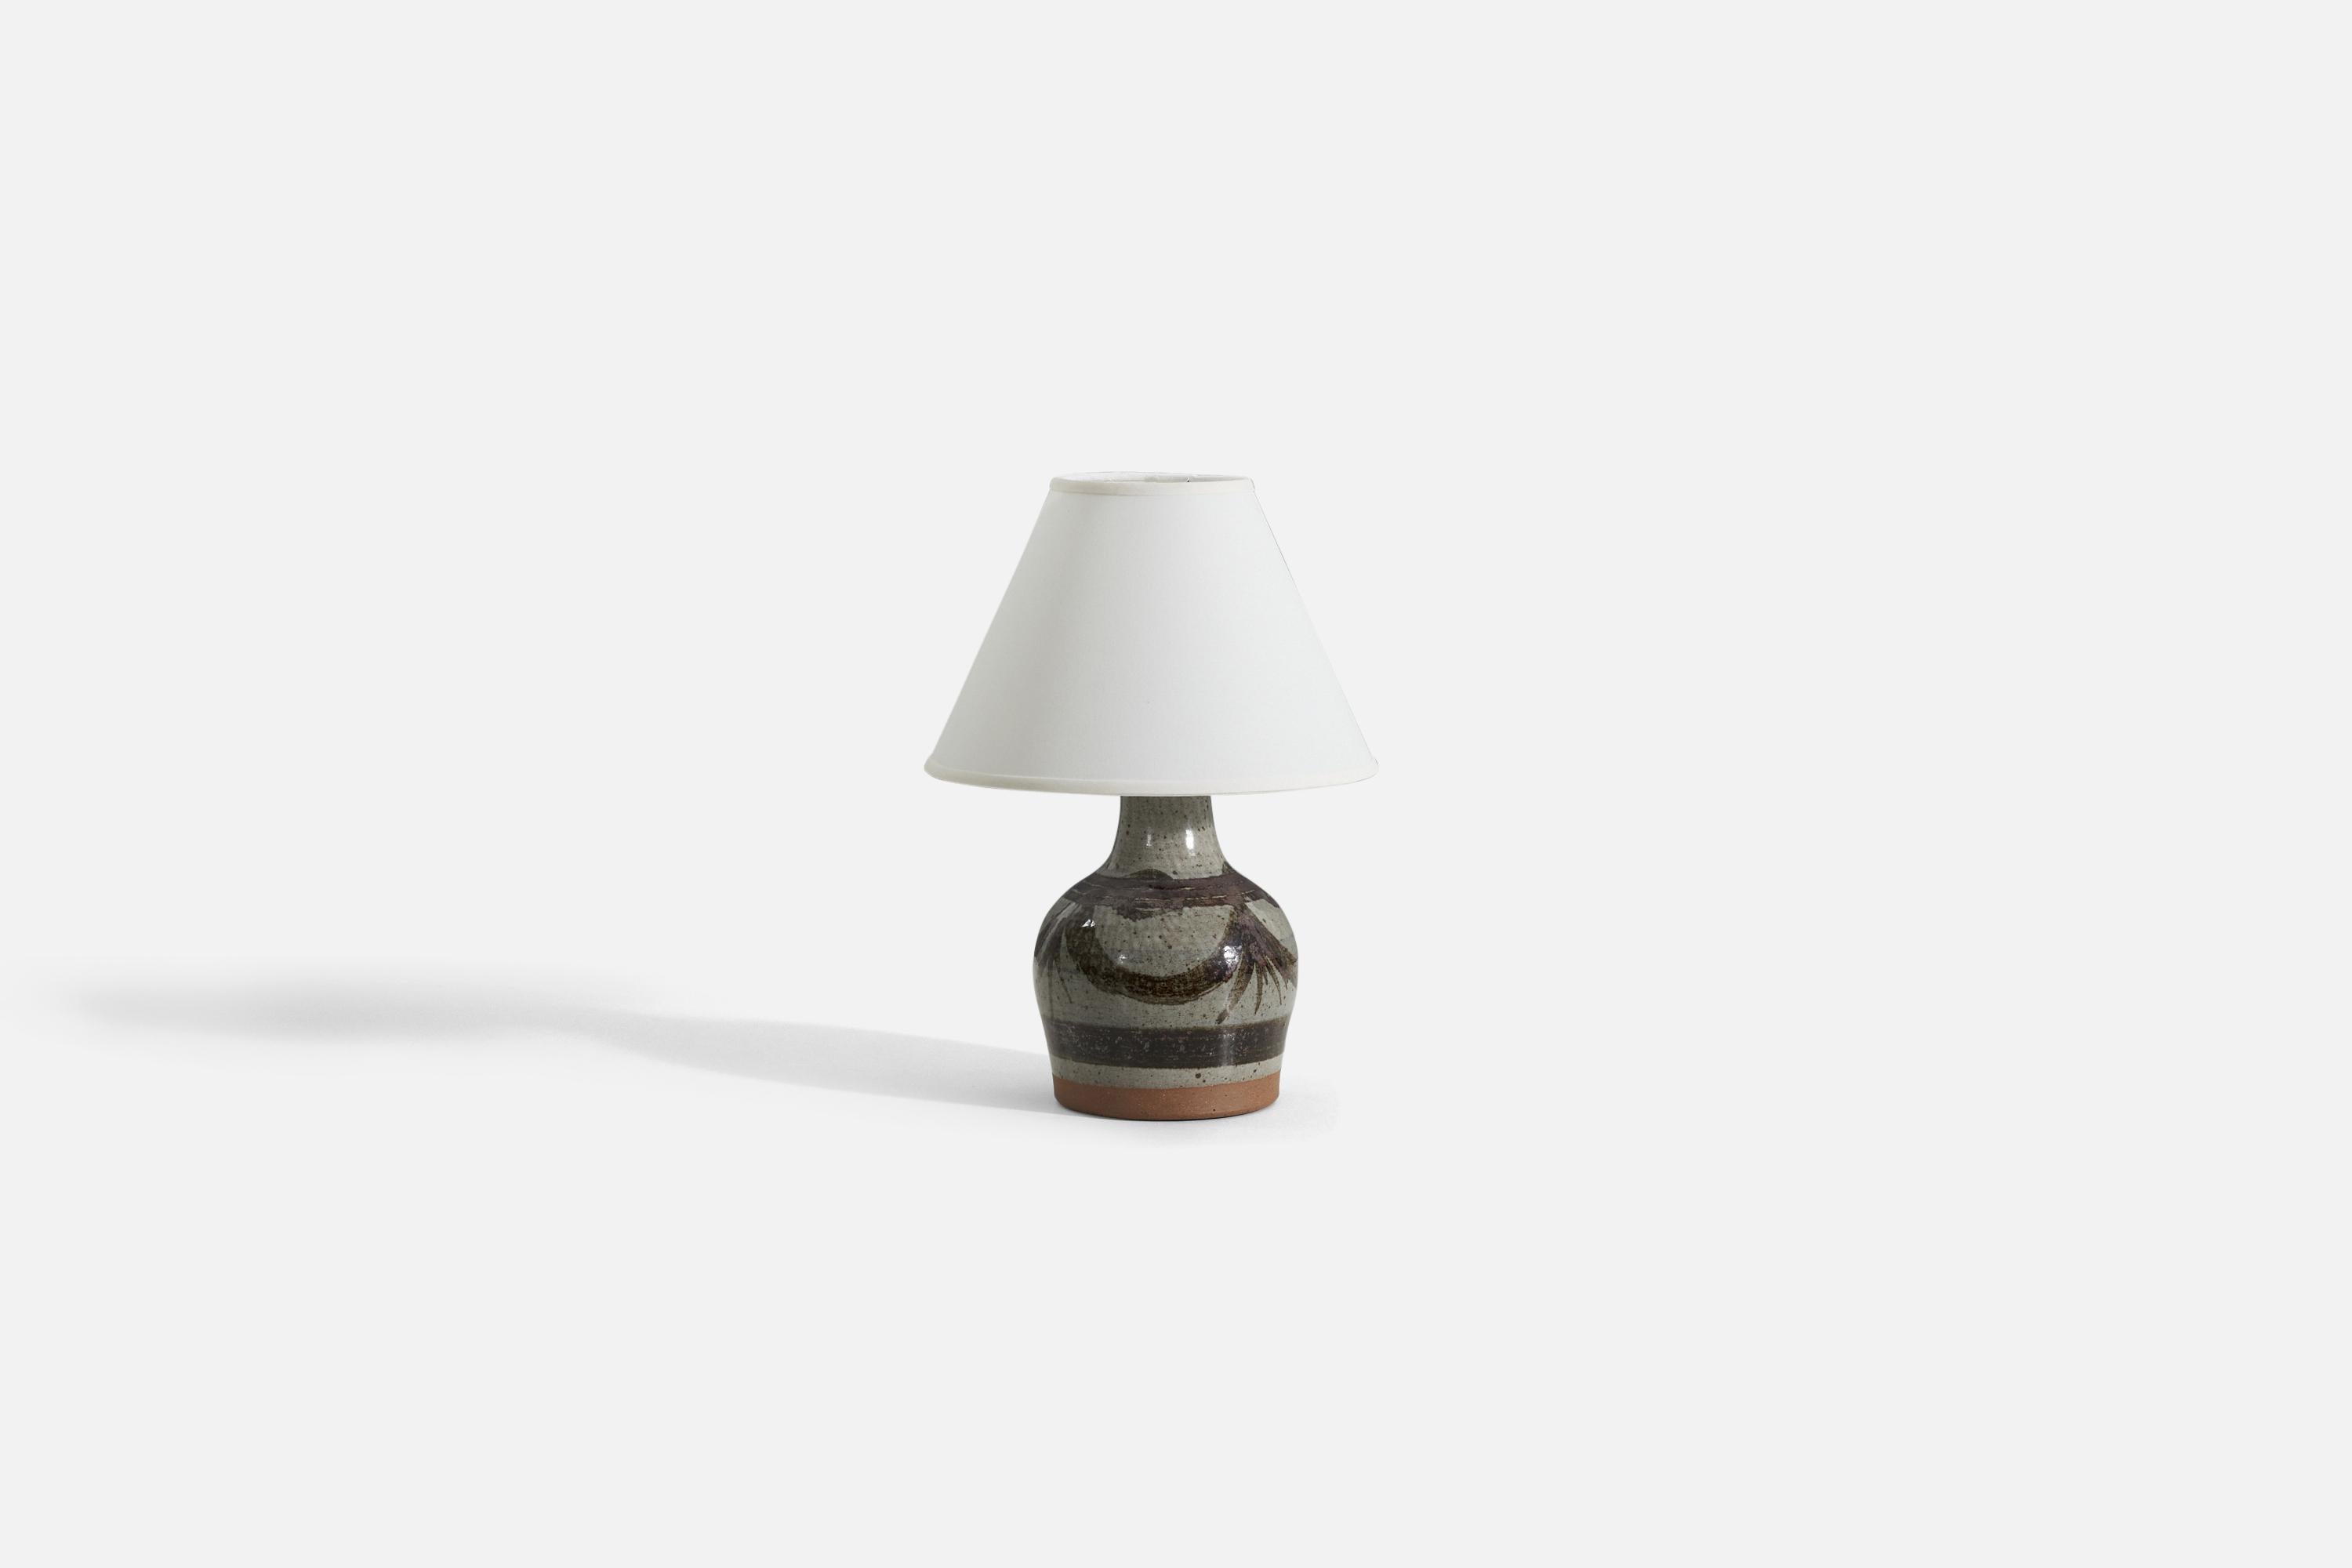 A gray and brown glazed stoneware table lamp, designed and produced by Helle Allpass, Denmark, 1960s.

Sold without lampshade.
Measurements listed are of lamp itself. 
Measurements of shade : 5 x 12.25 x 8.75 - (T x B x S)
Measurements with